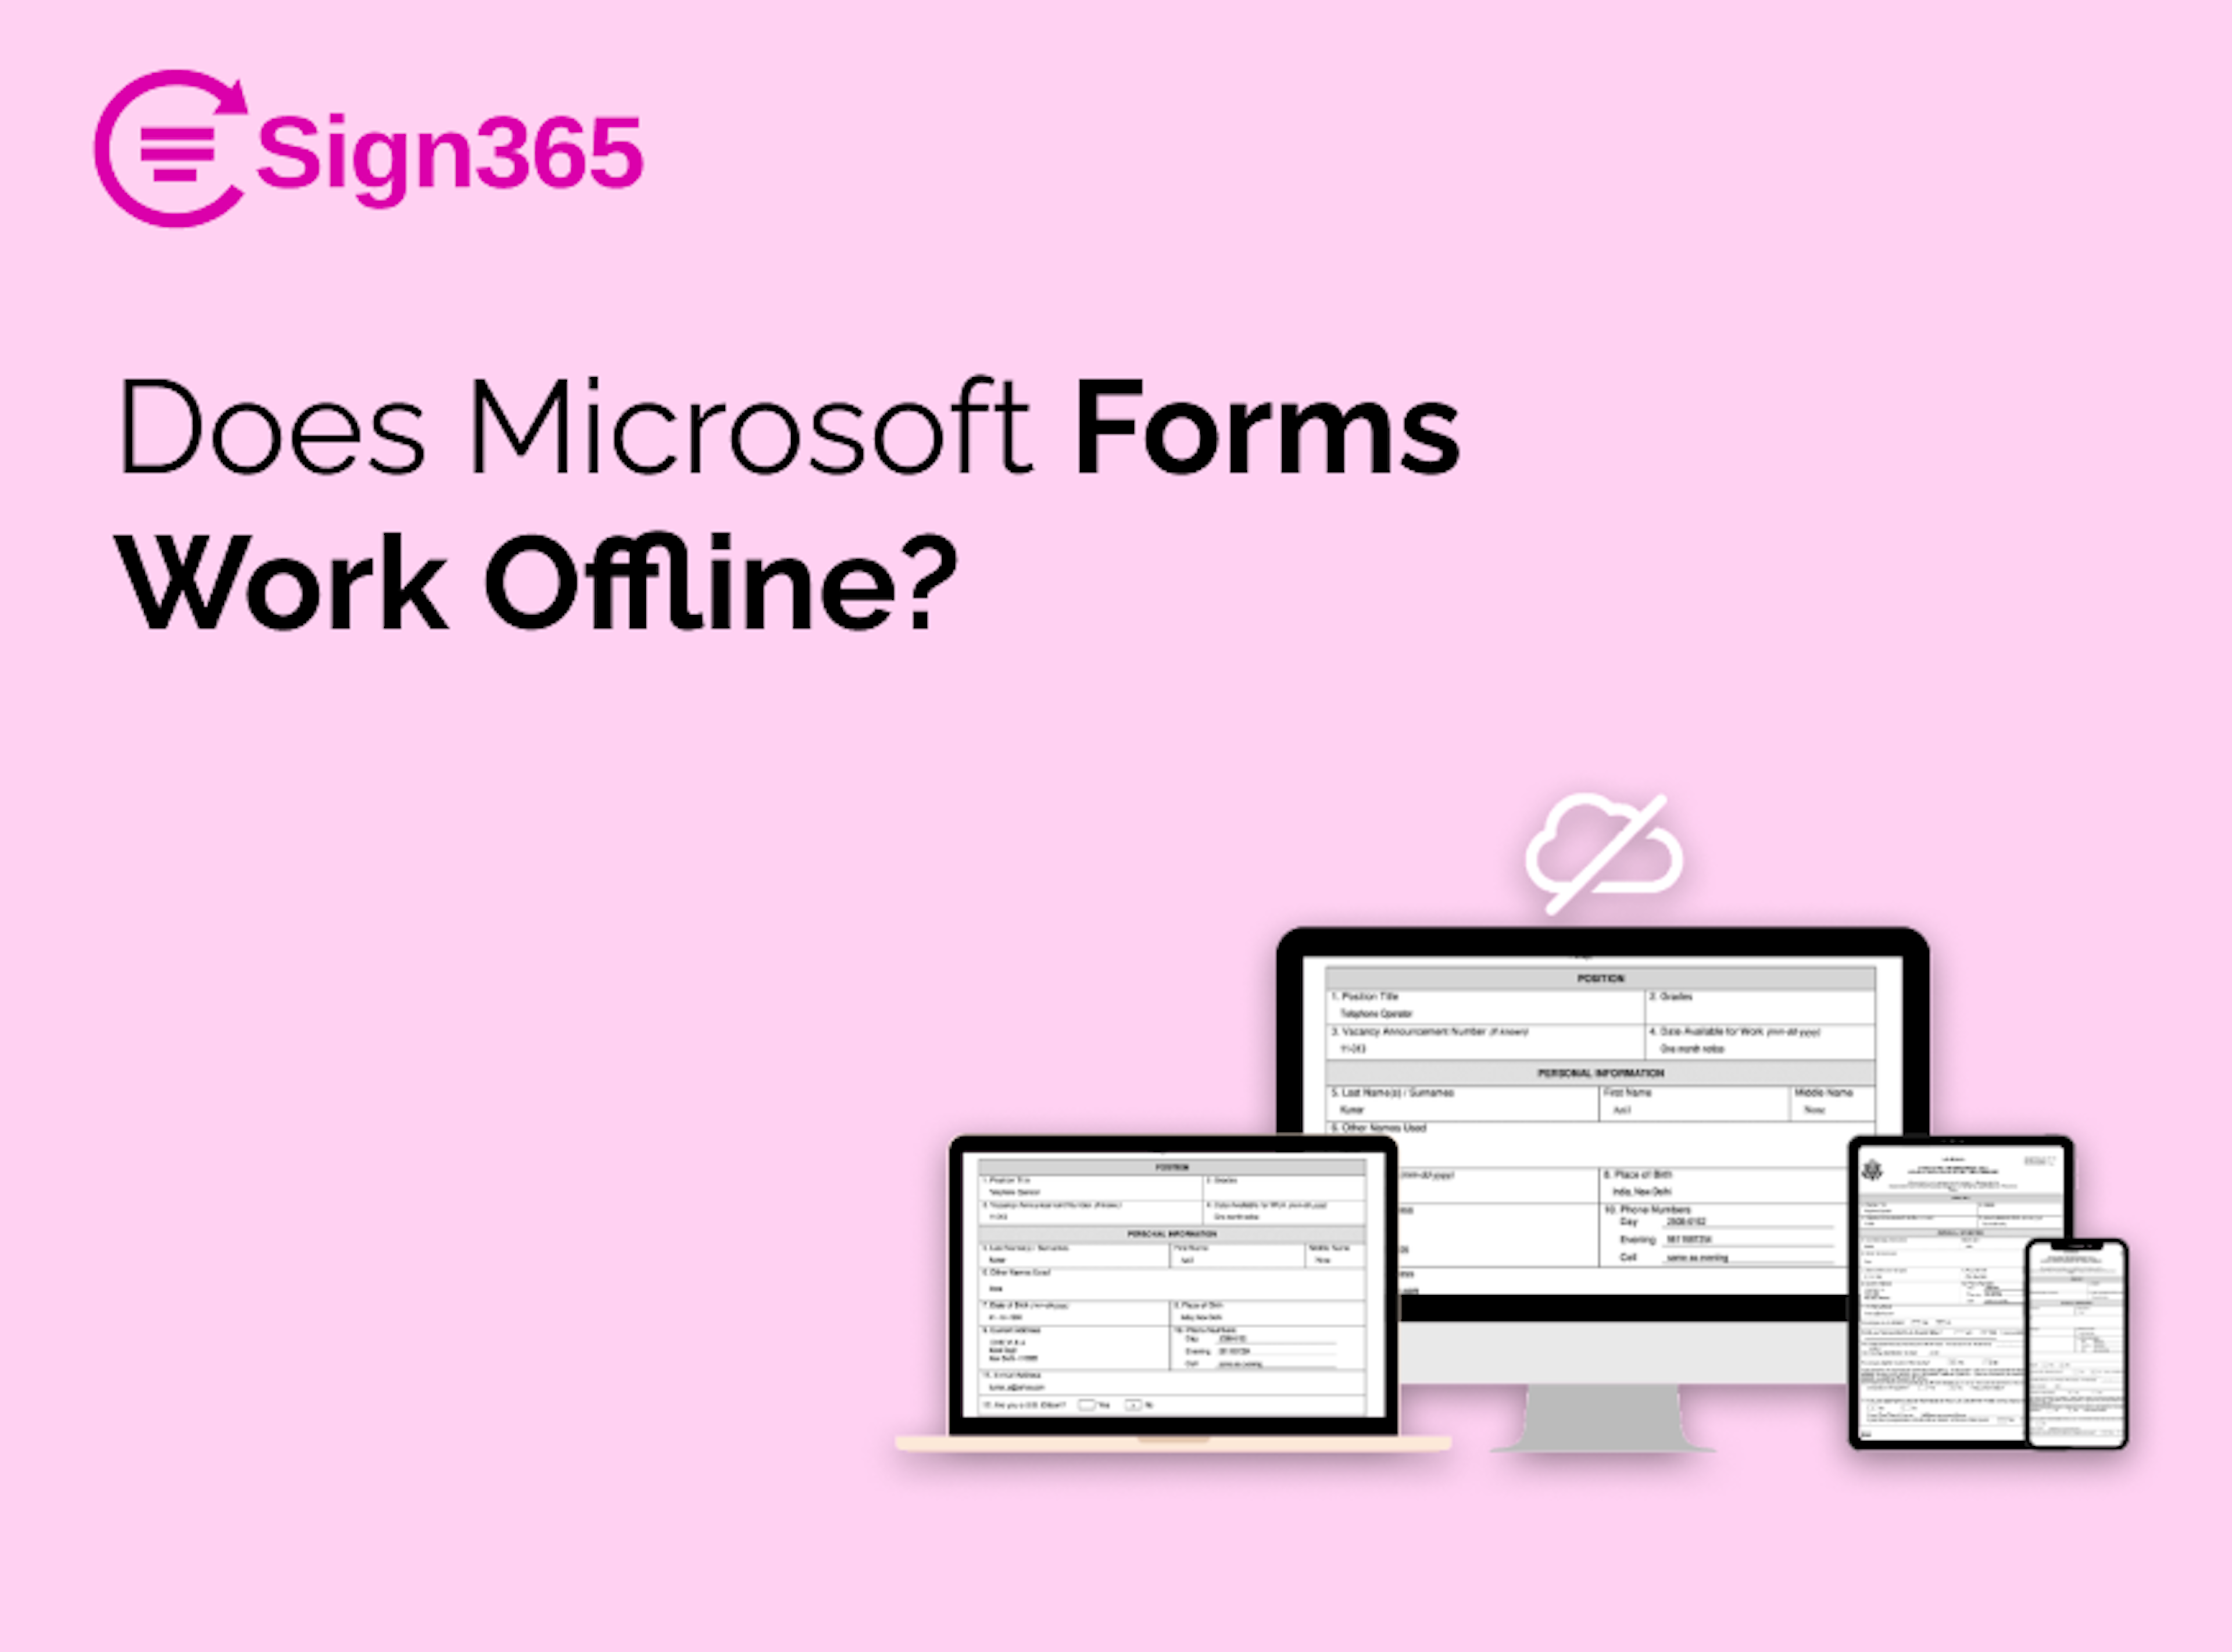 Does Microsoft Forms Work Offline?